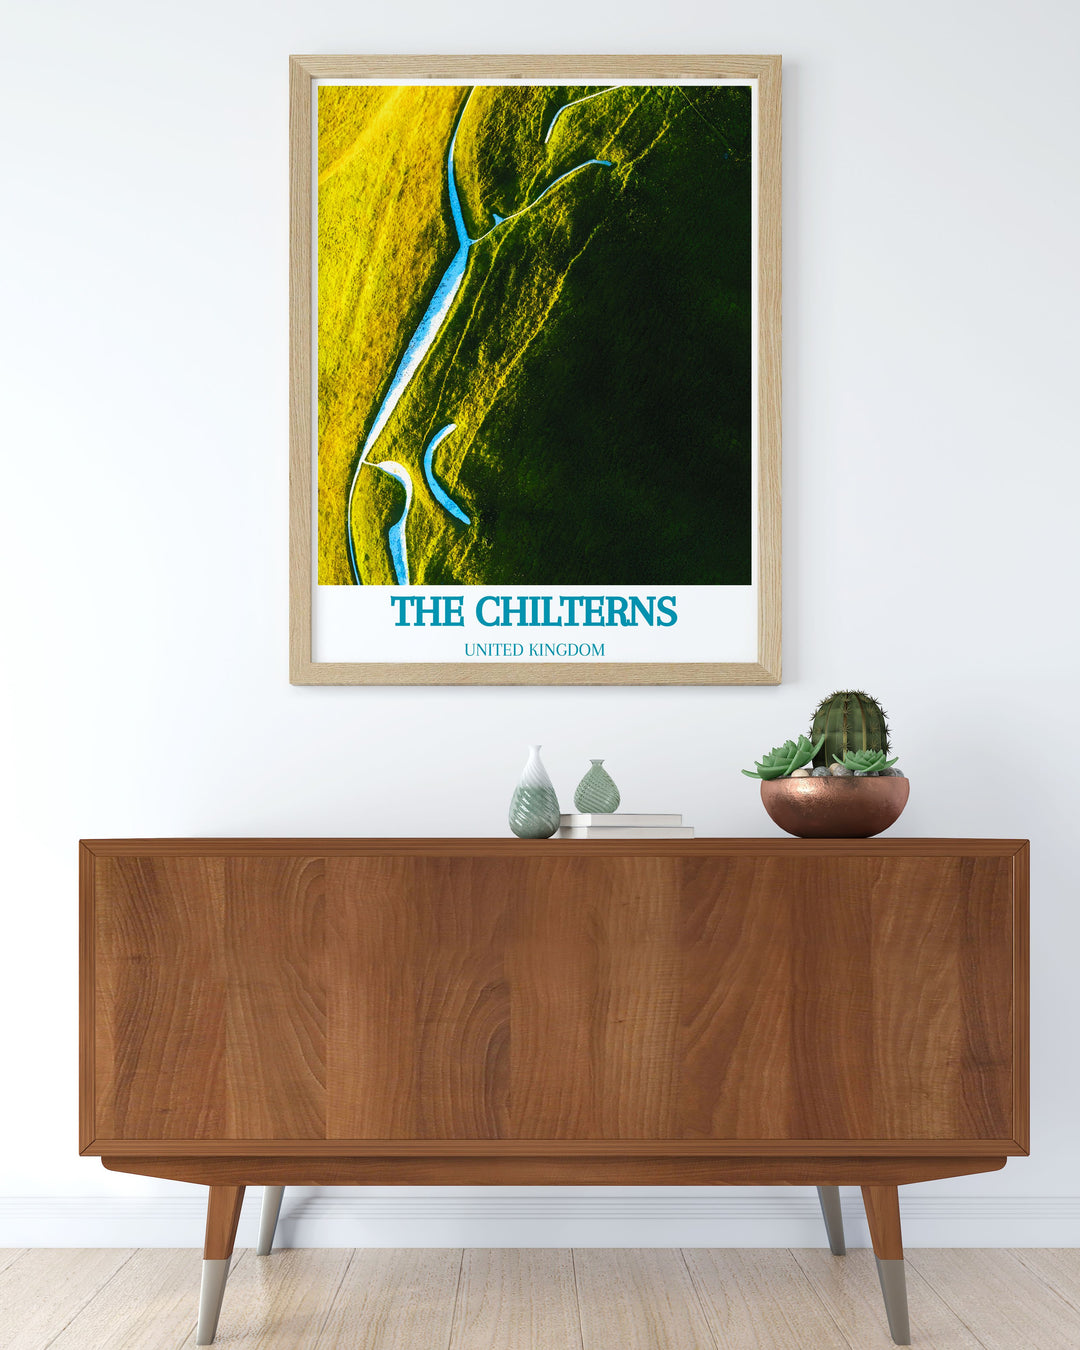 The Chilterns Custom Prints providing personalized art pieces that highlight your favorite locations in The Chilterns, perfect for commemorating special trips or celebrating this beautiful region.